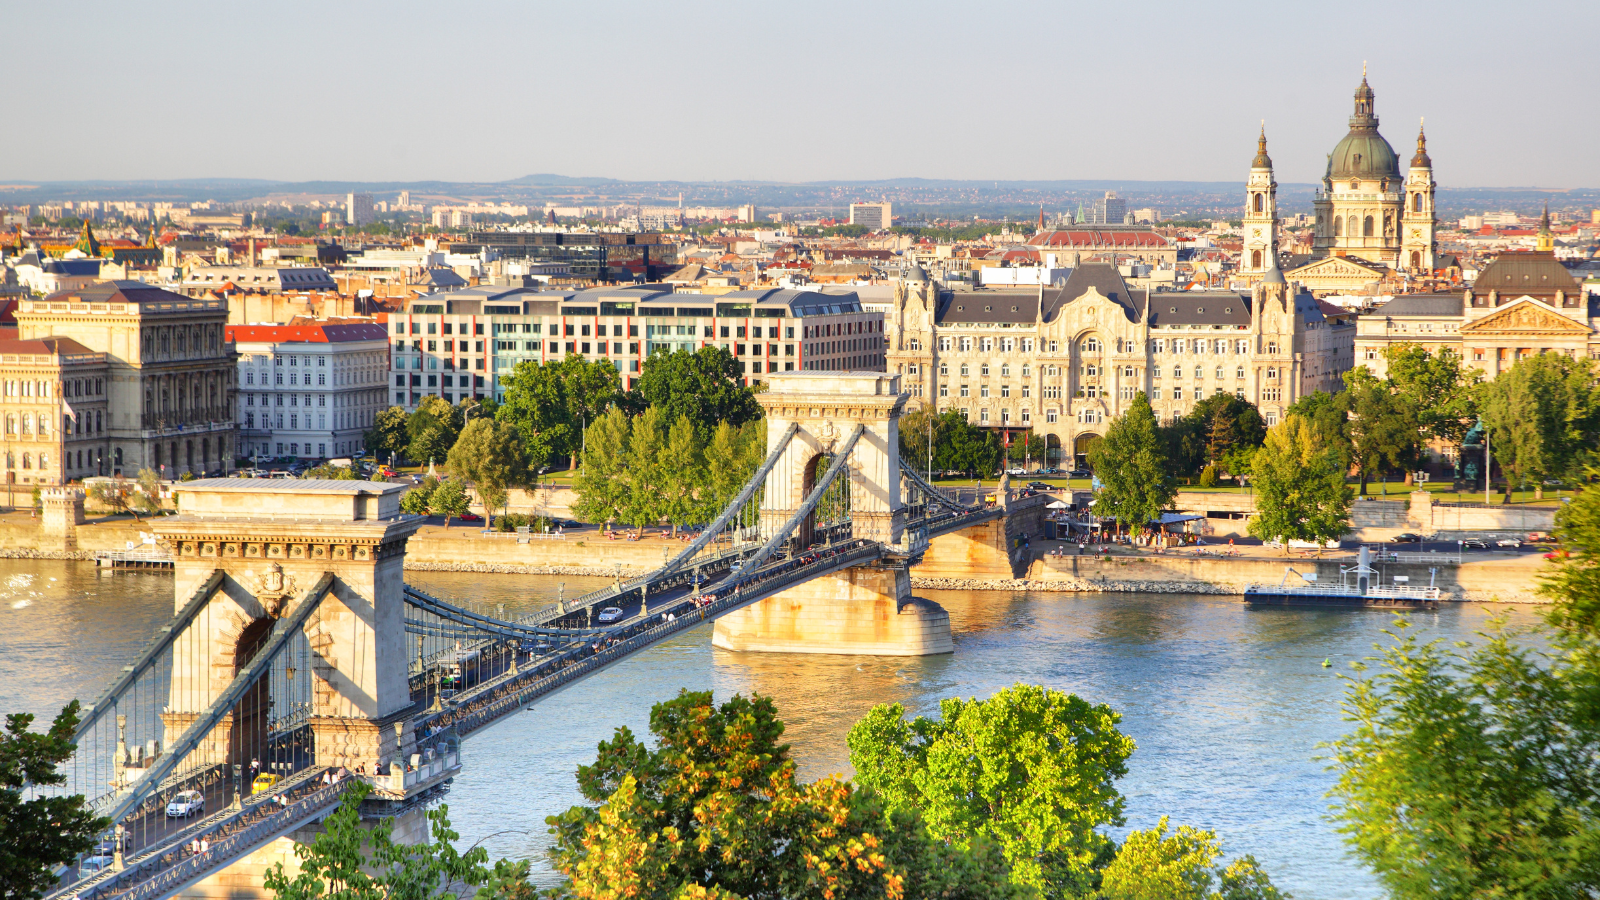 Bus rental in Budapest in 1 day